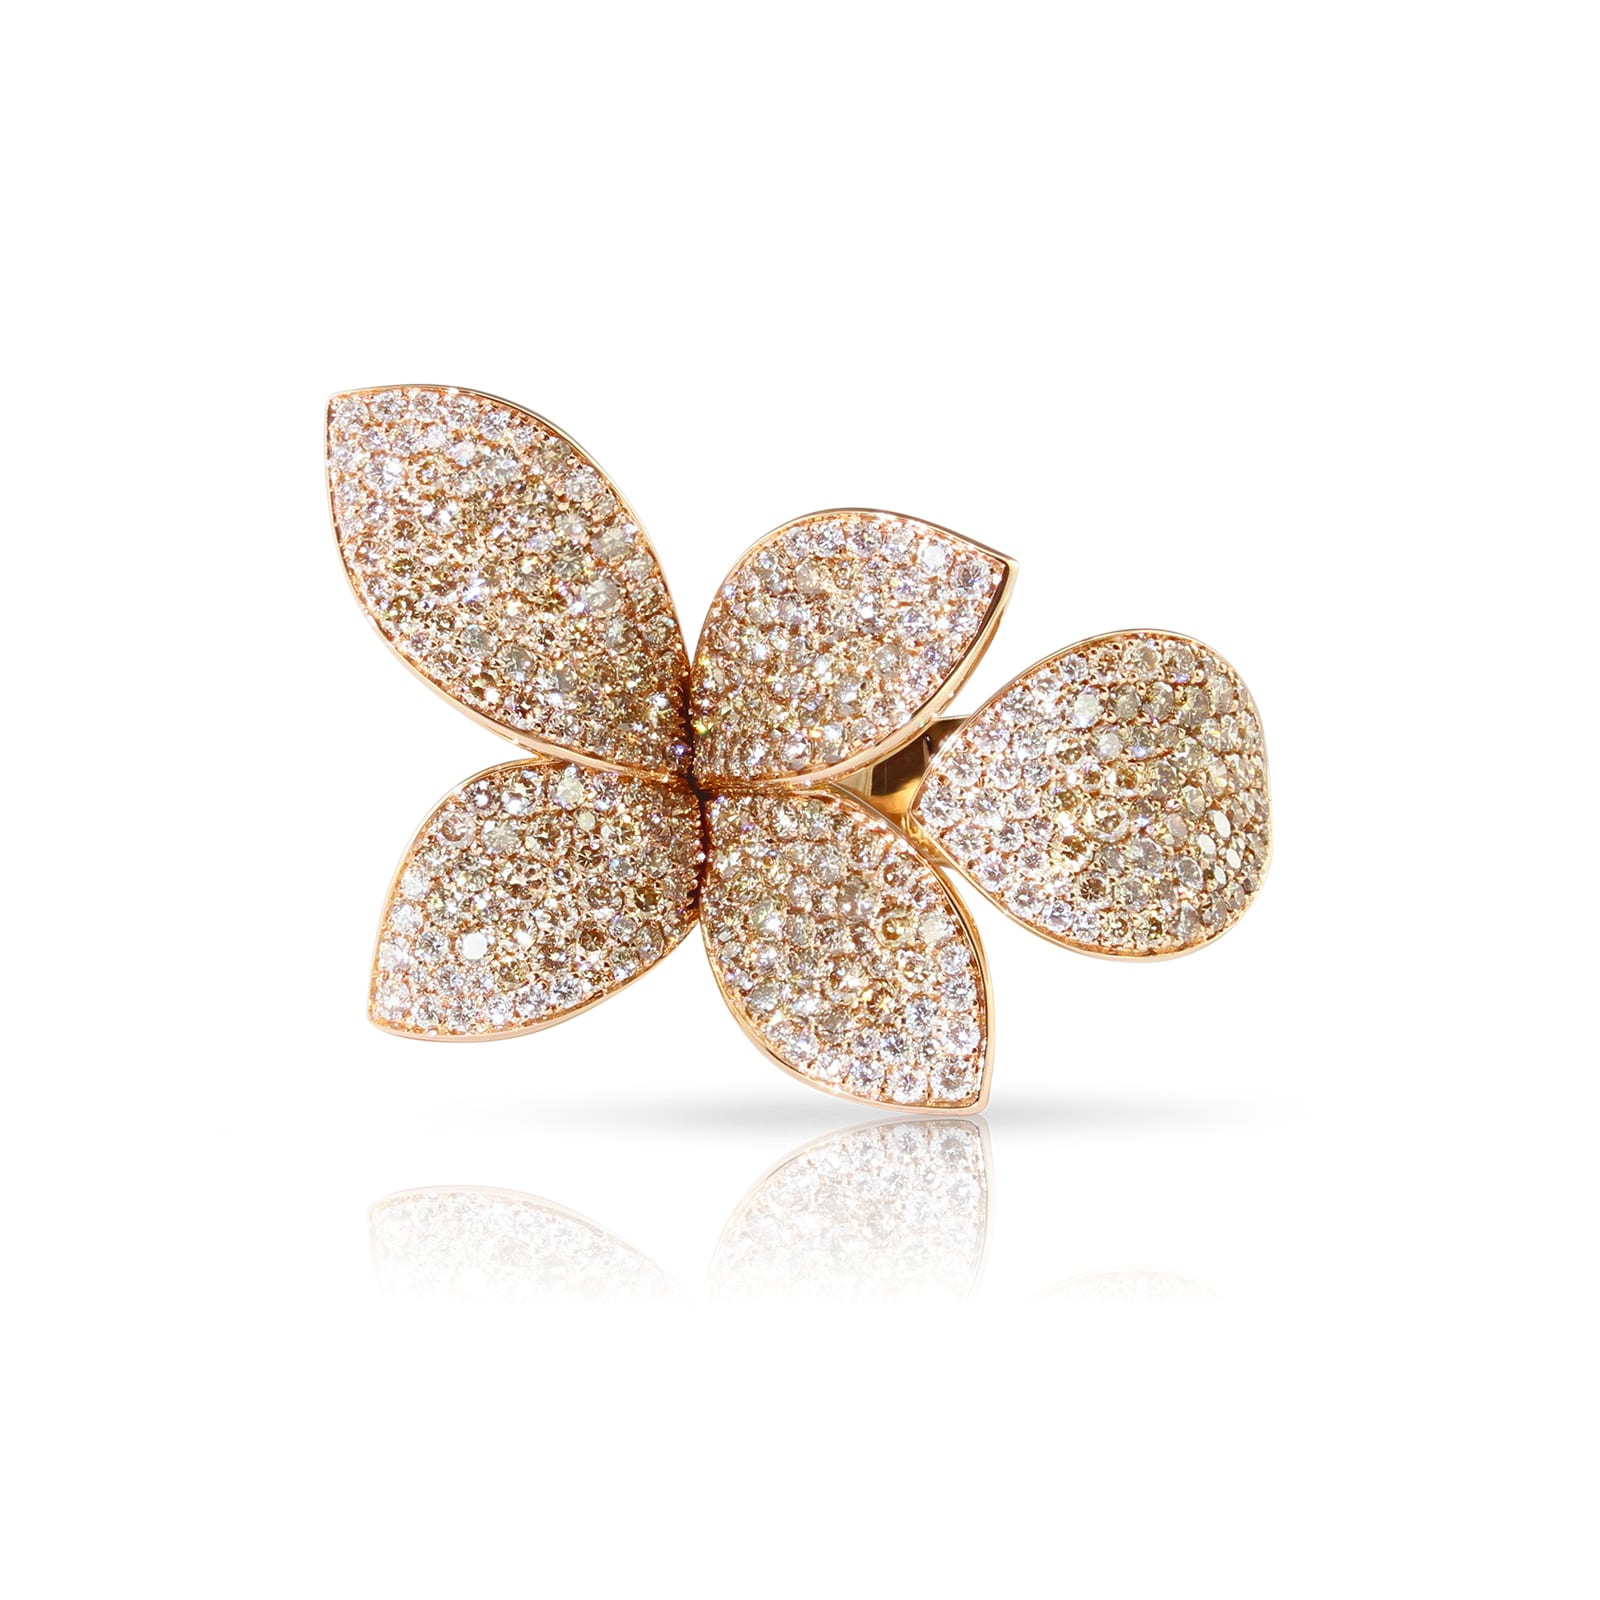 Giardini Segreti Five Leaves Small Flower Ring in 18ct Rose Gold with White and Champagne Diamonds - Ring Size M